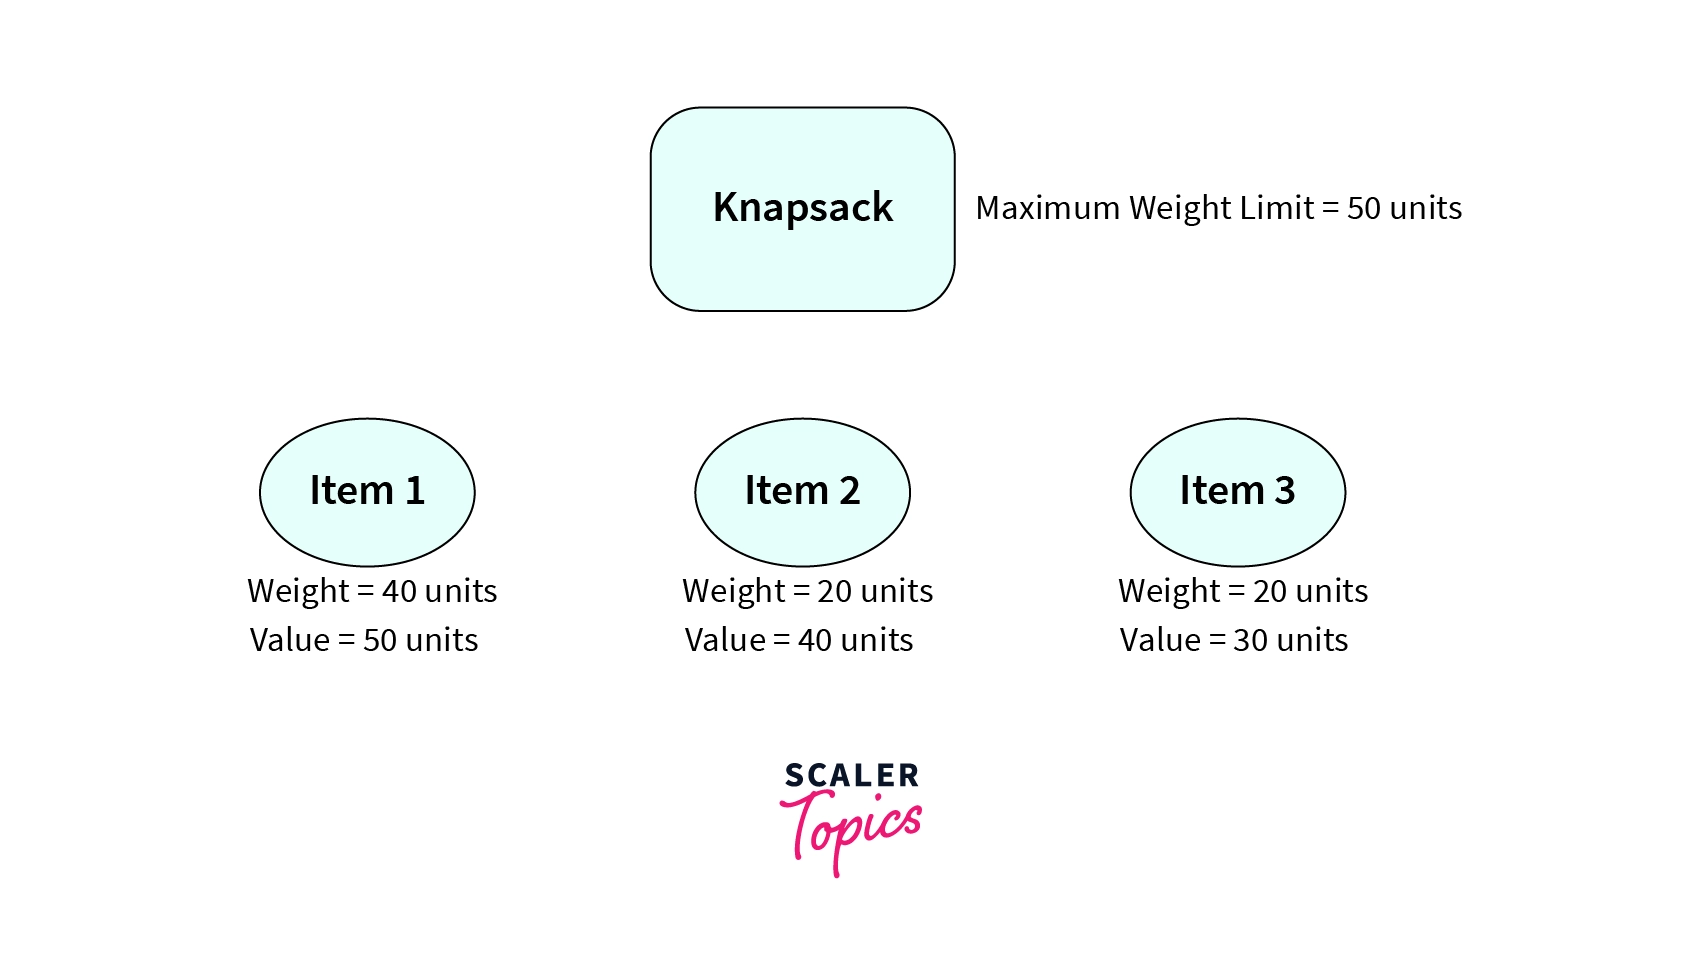 Find the maximum sum of the values of the items that can be filled in the knapsack